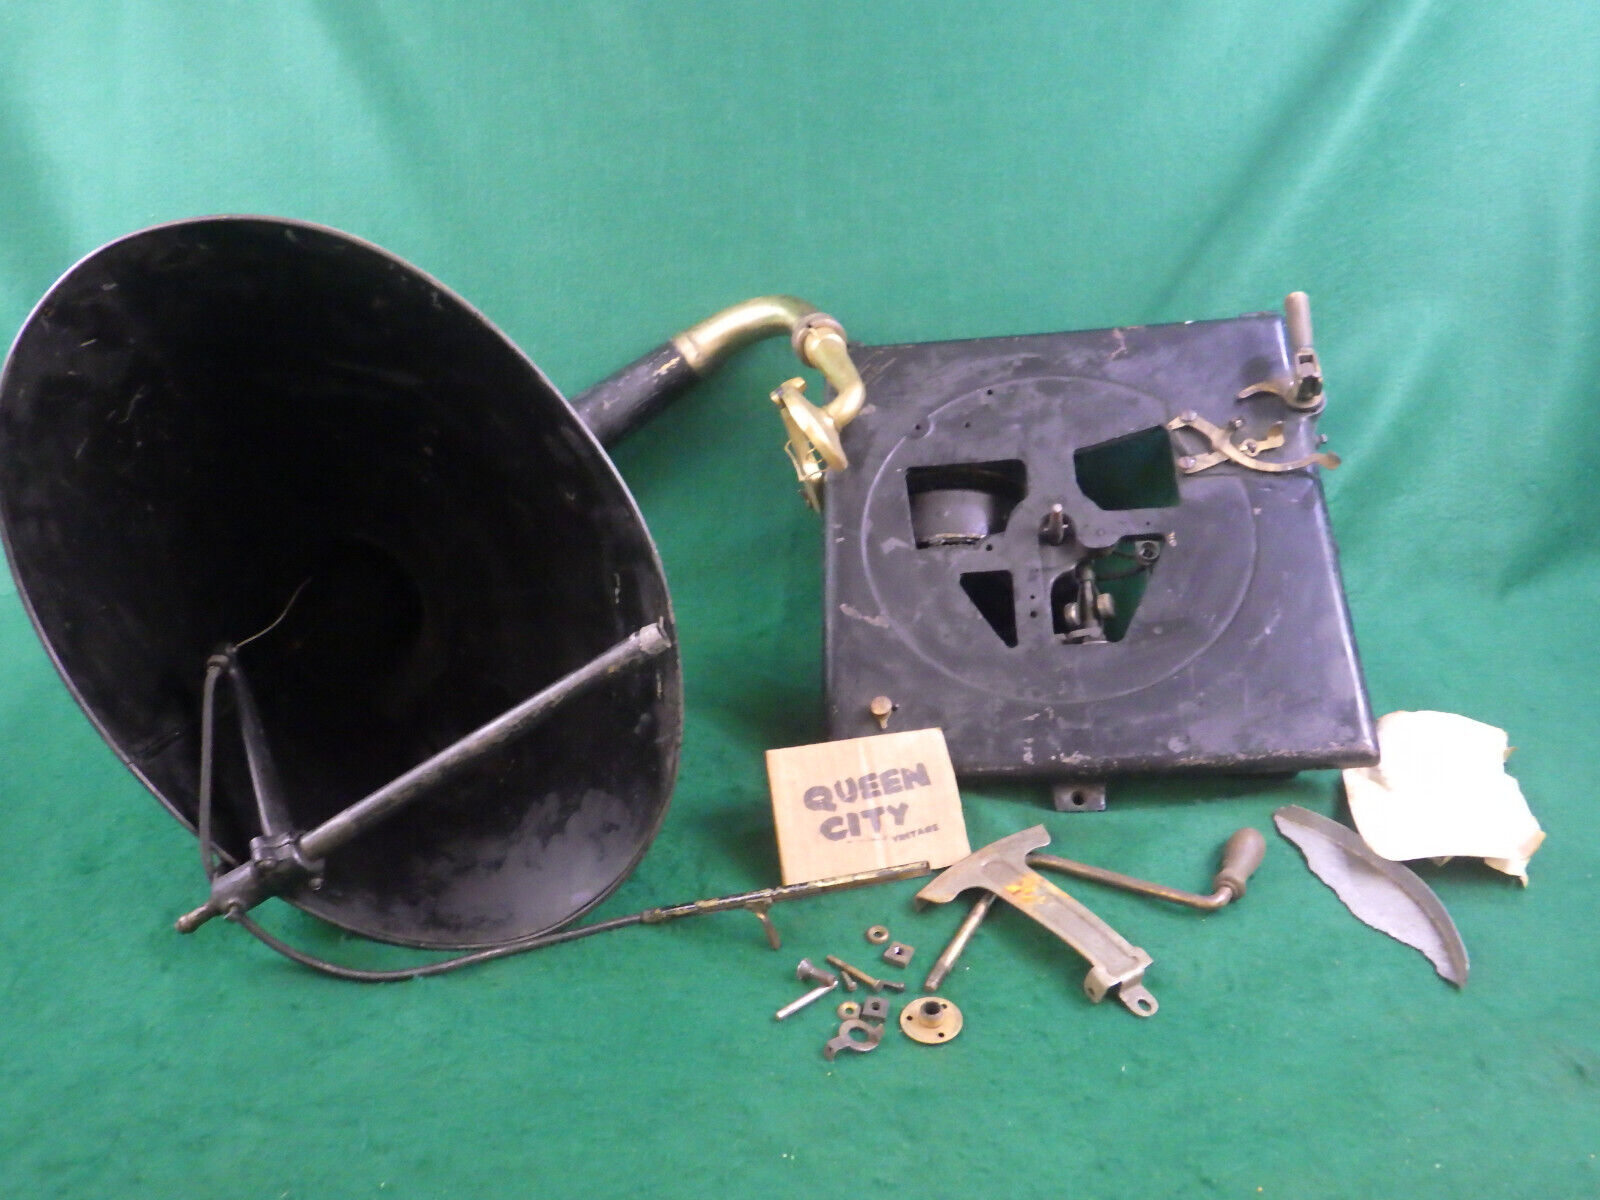 Early Edison cabinet phonograph trumpet+parts lot A-100?